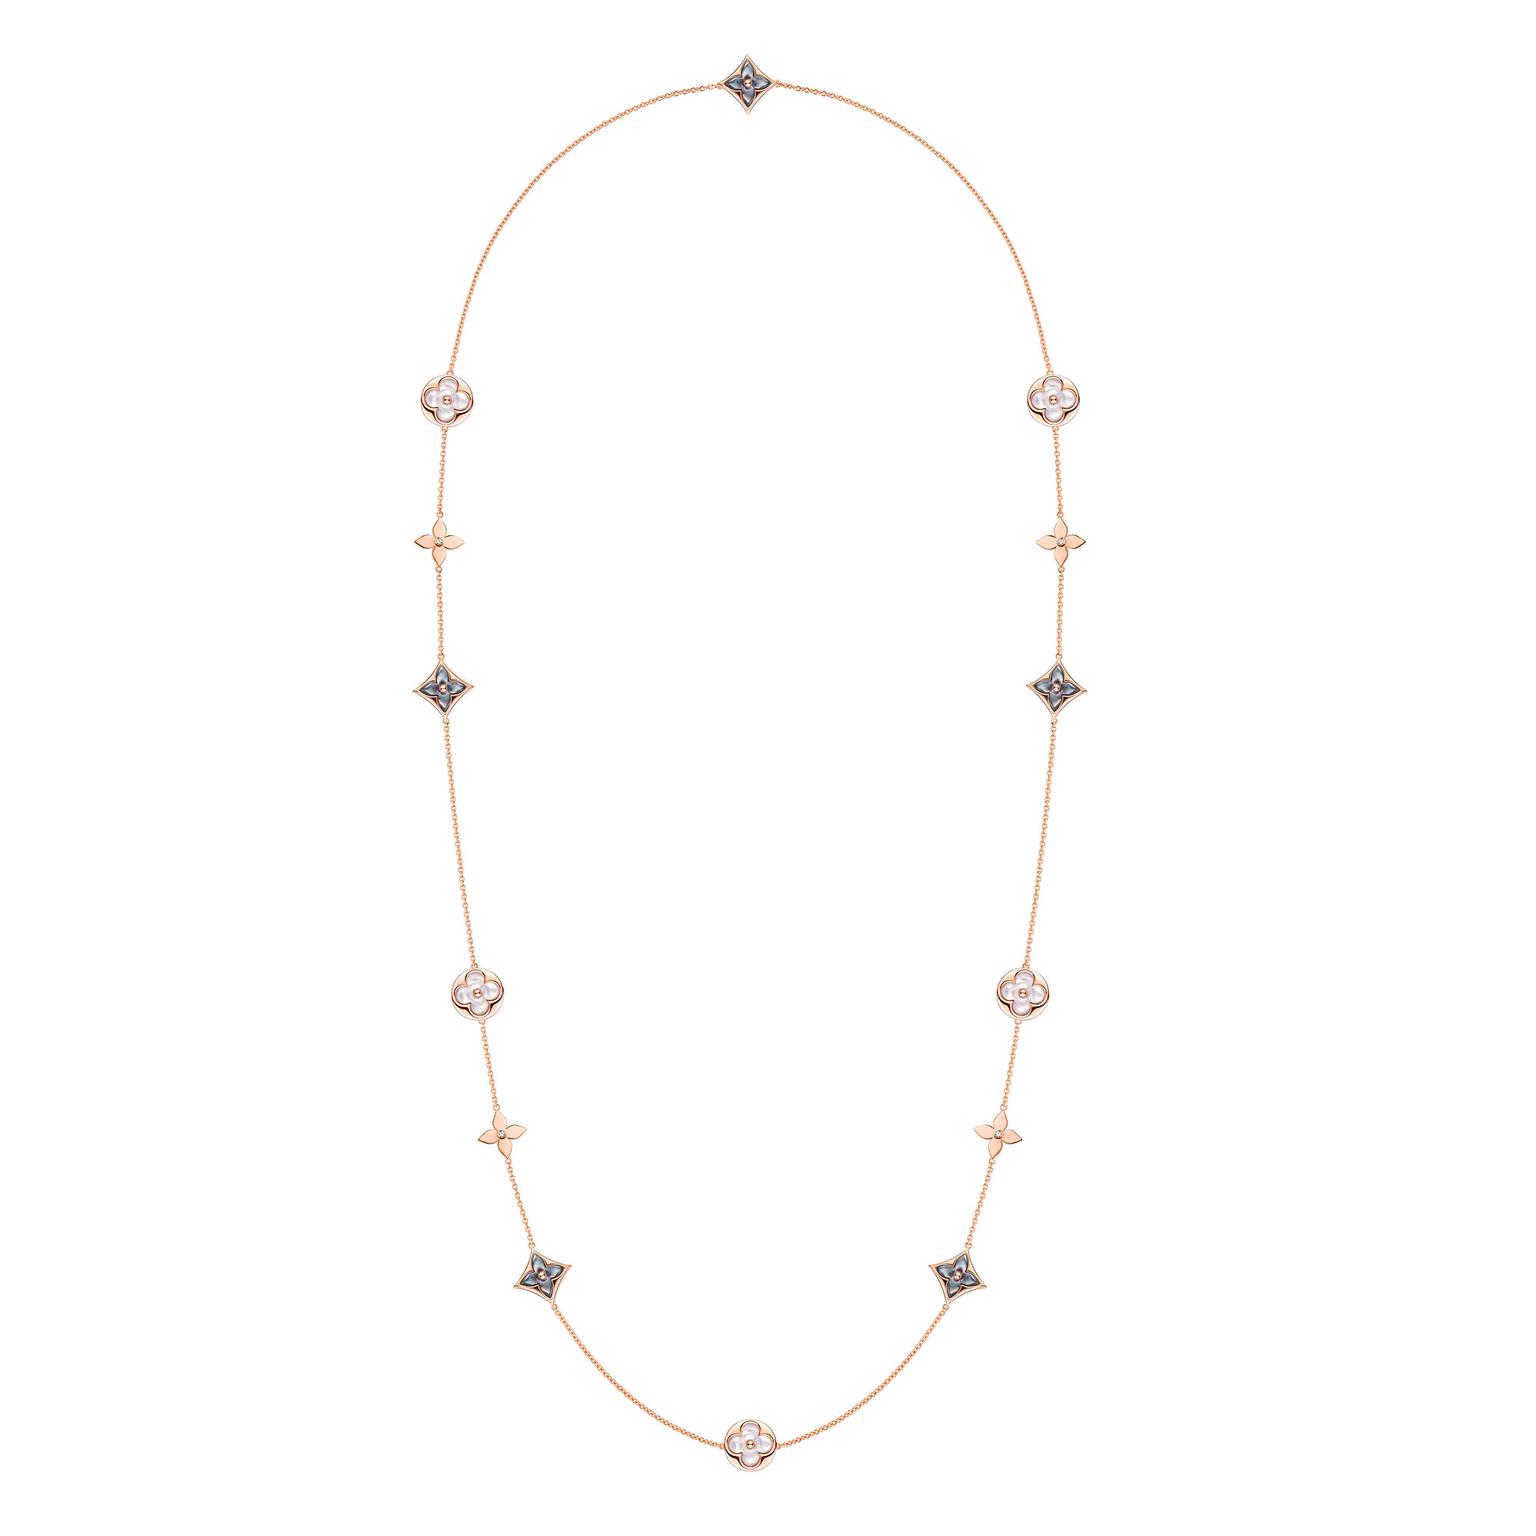 Color Blossom BB mother-of-pearl sautoir necklace